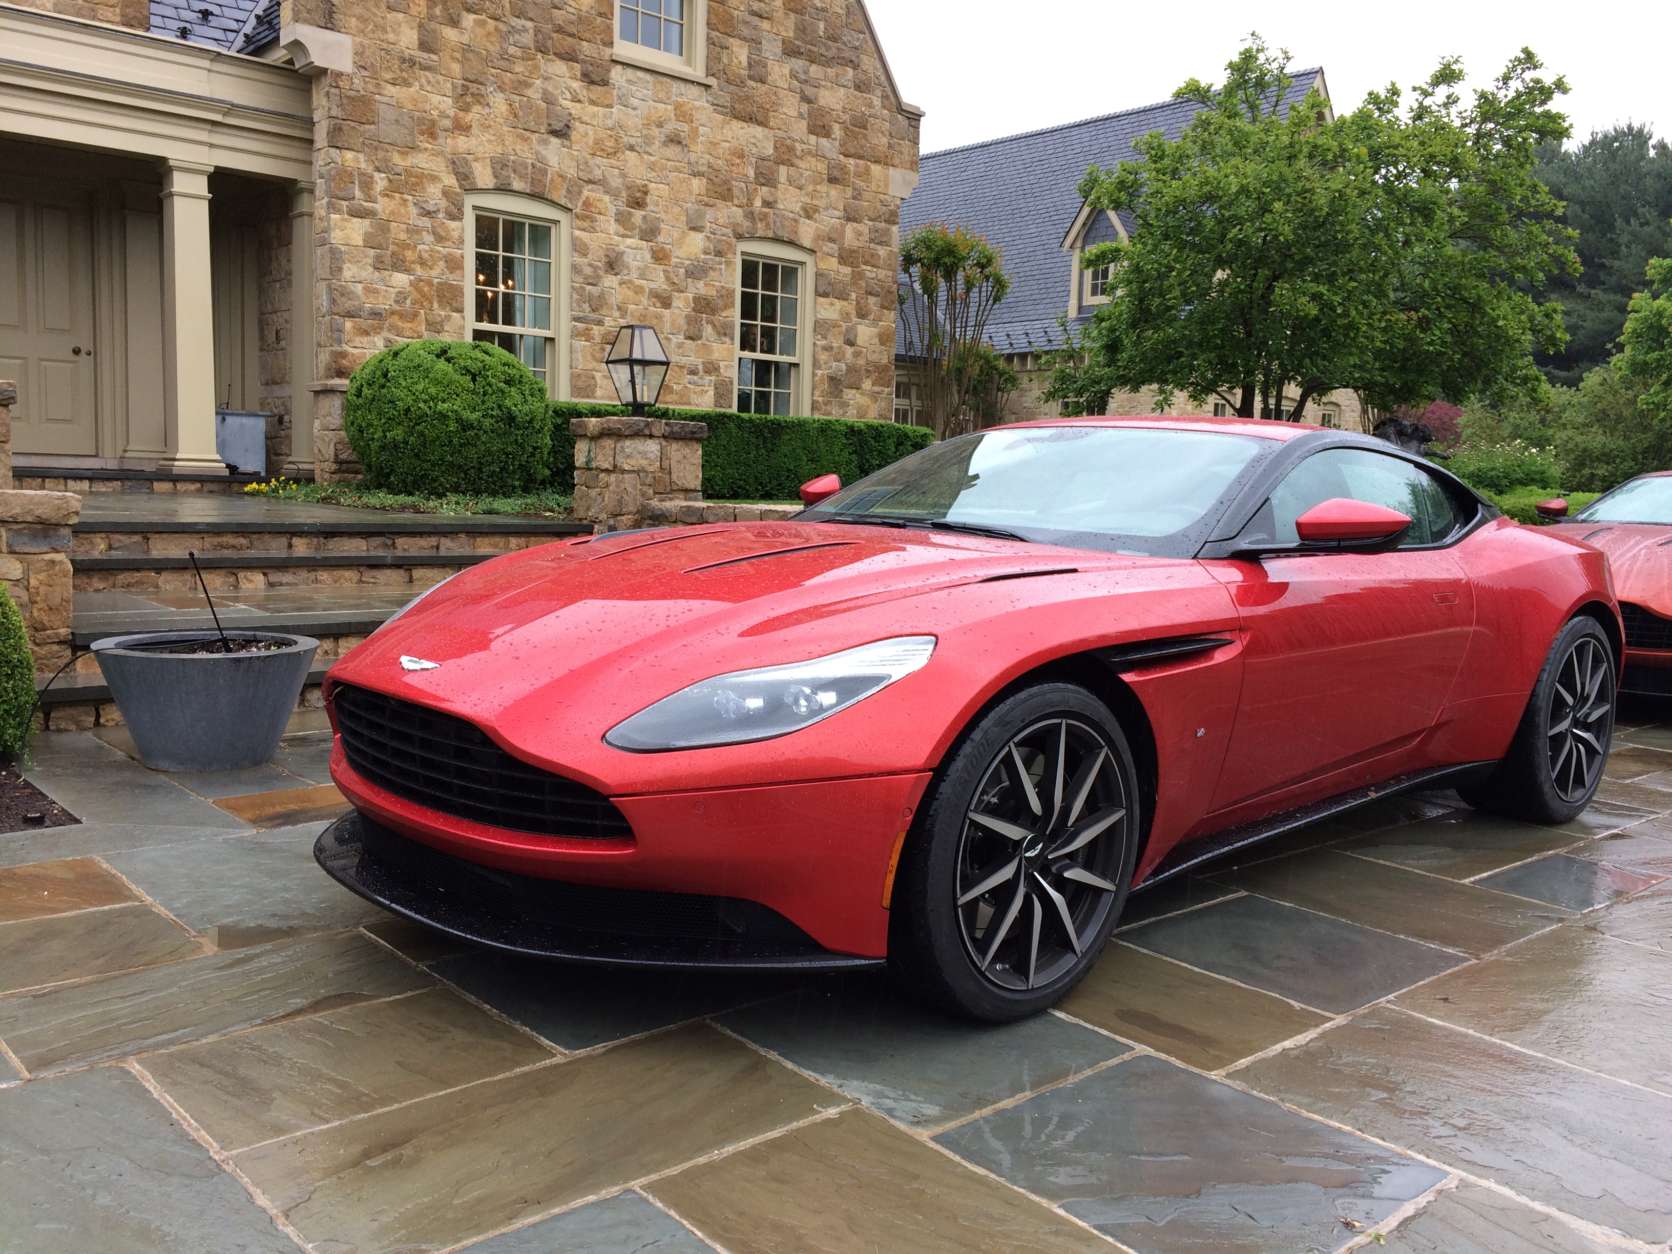 The new DB11 is an impressive grand touring automobile that brings Aston Martin into the 21st century. (WTOP/Mike Parris)